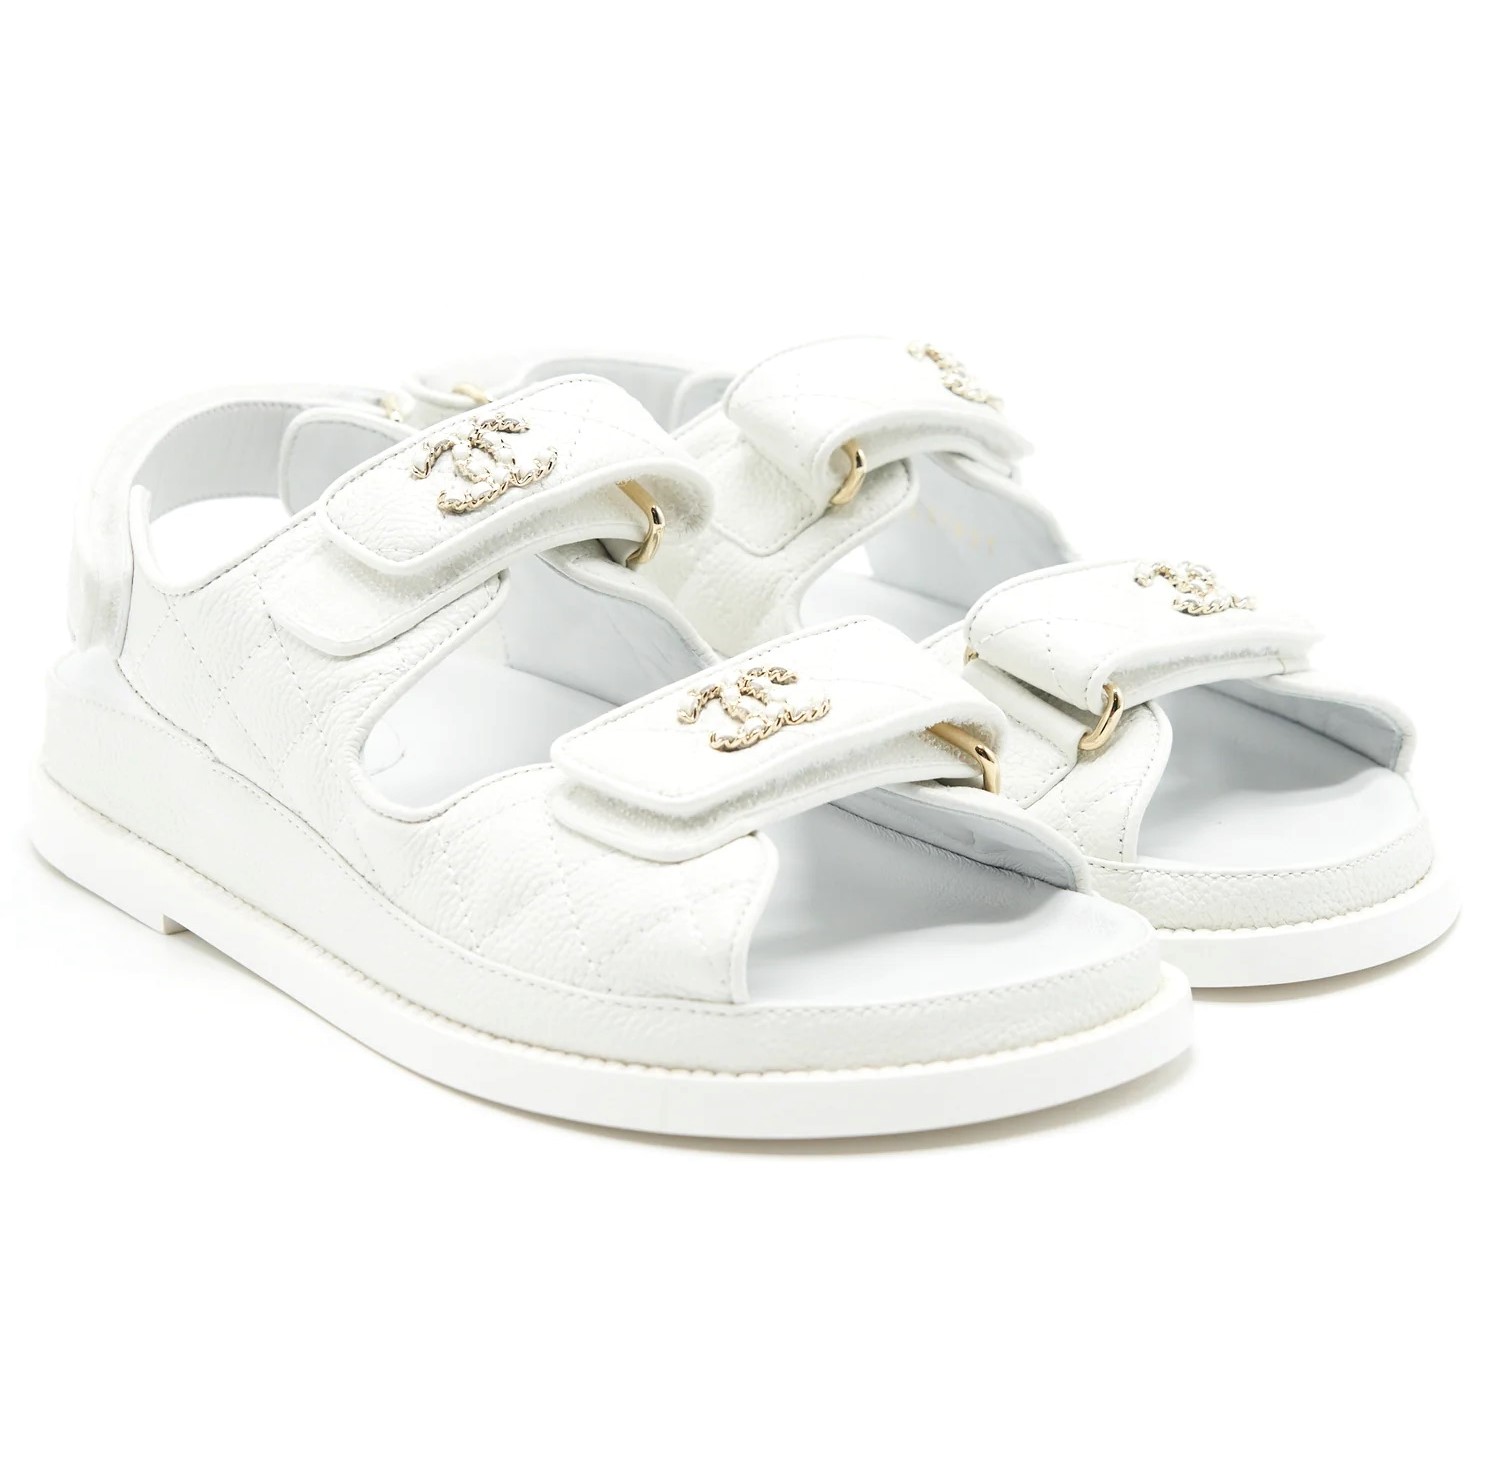 GIÀY SANDAL NỮ CHANEL WHITE QUILTED LAMBSKIN DAD SANDALS 6